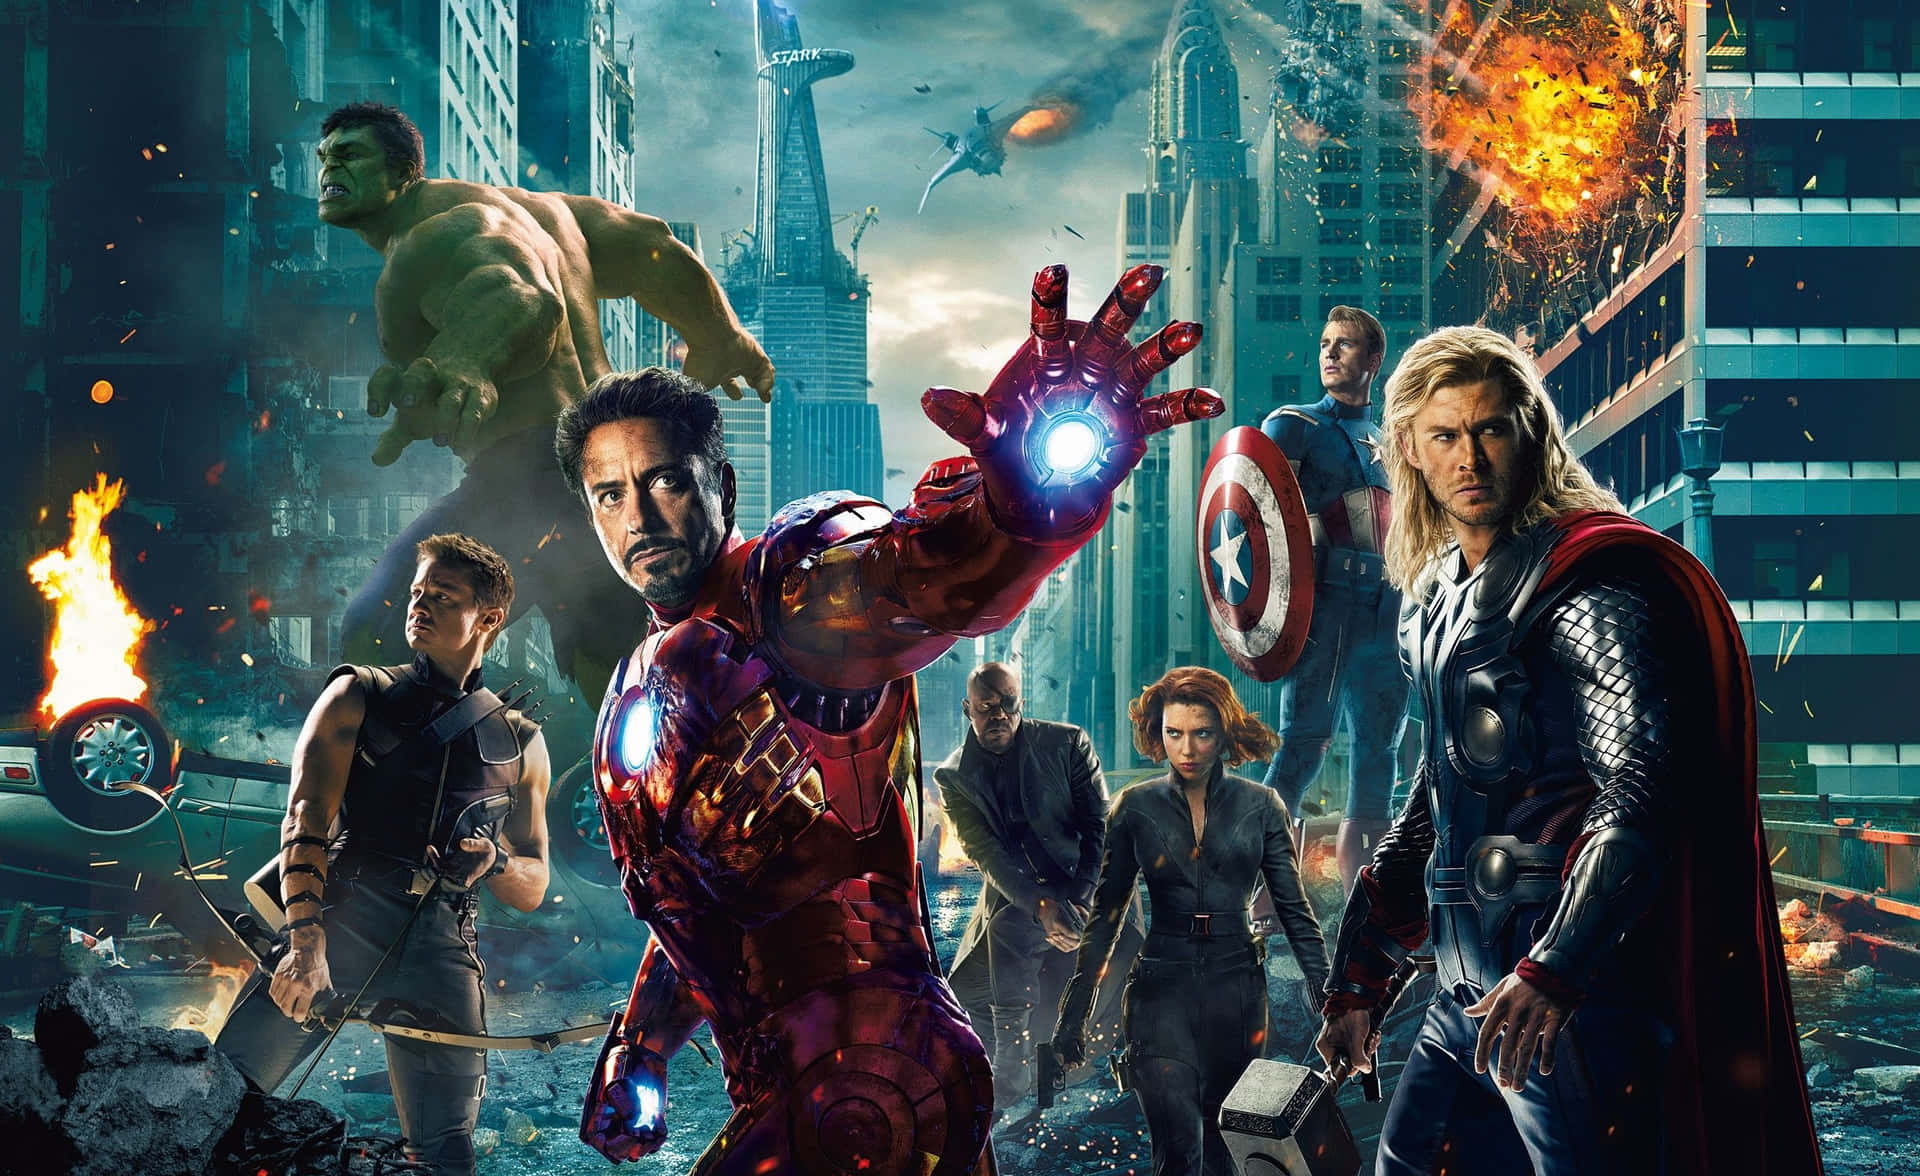 Live the Adventure and Unleash Your Inner Superhero with the Avengers Laptop Wallpaper